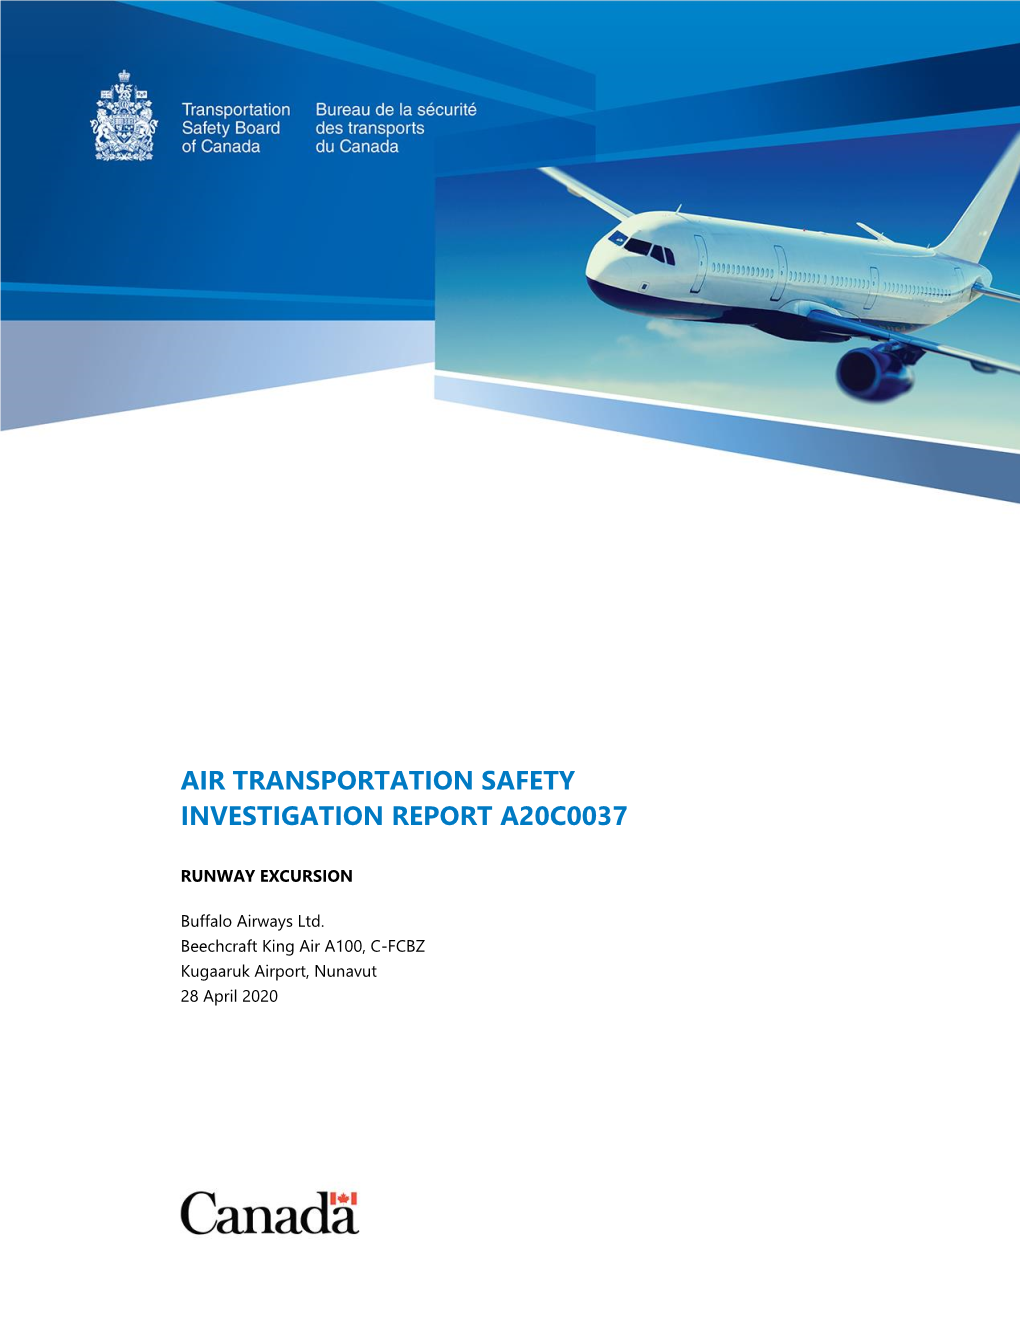 Air Transportation Safety Investigation Report A20c0037